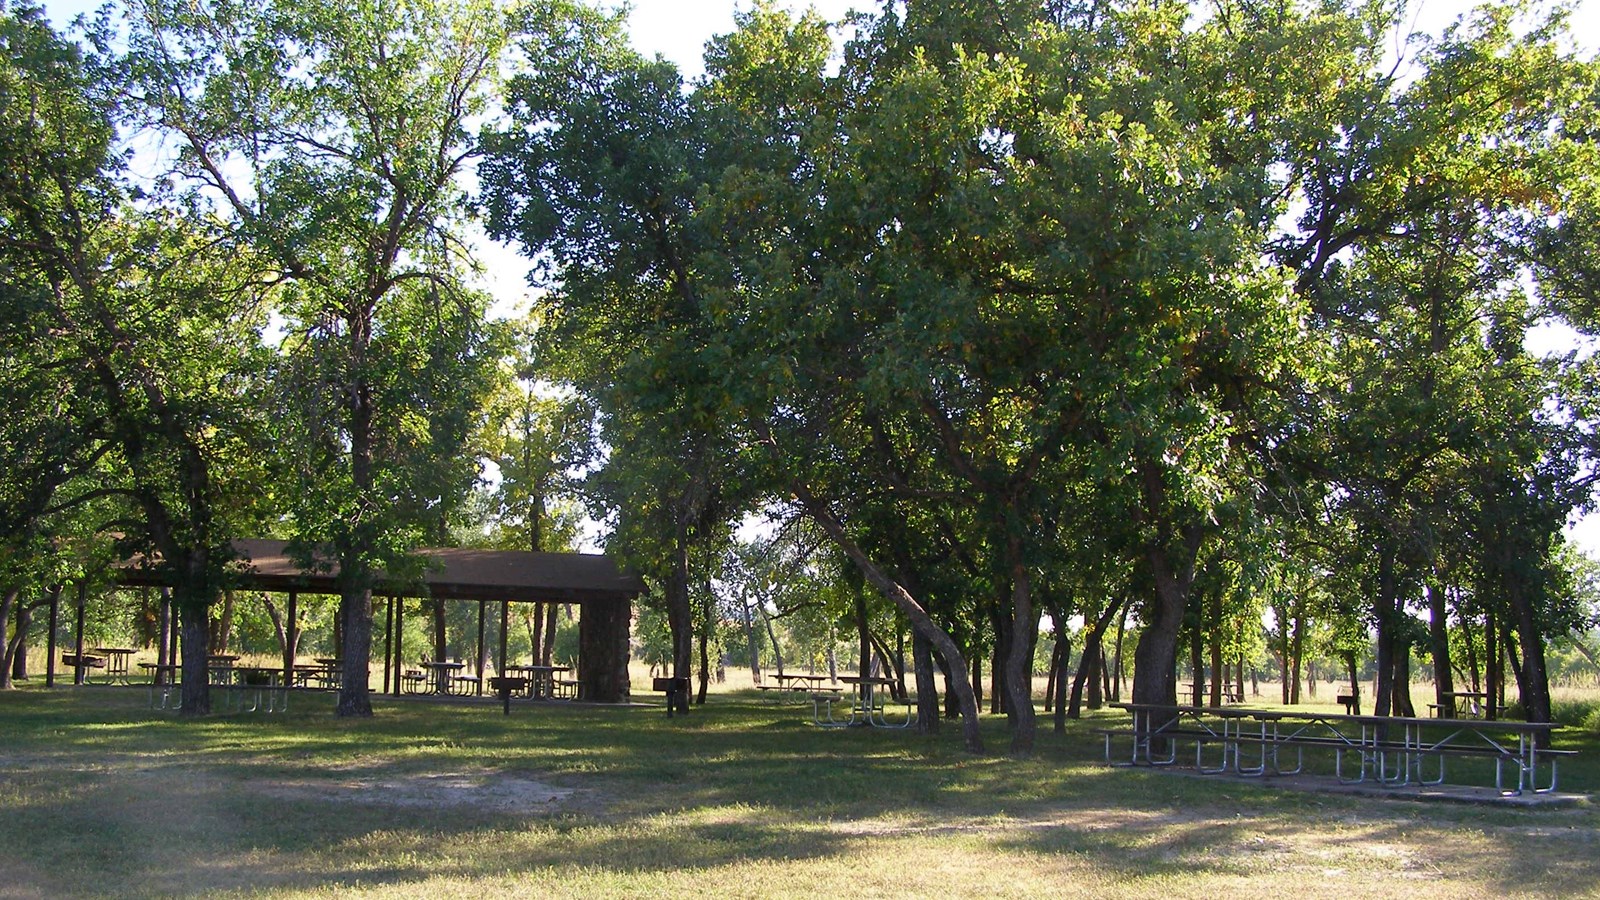 picnic benches under leafy trees in a grass field